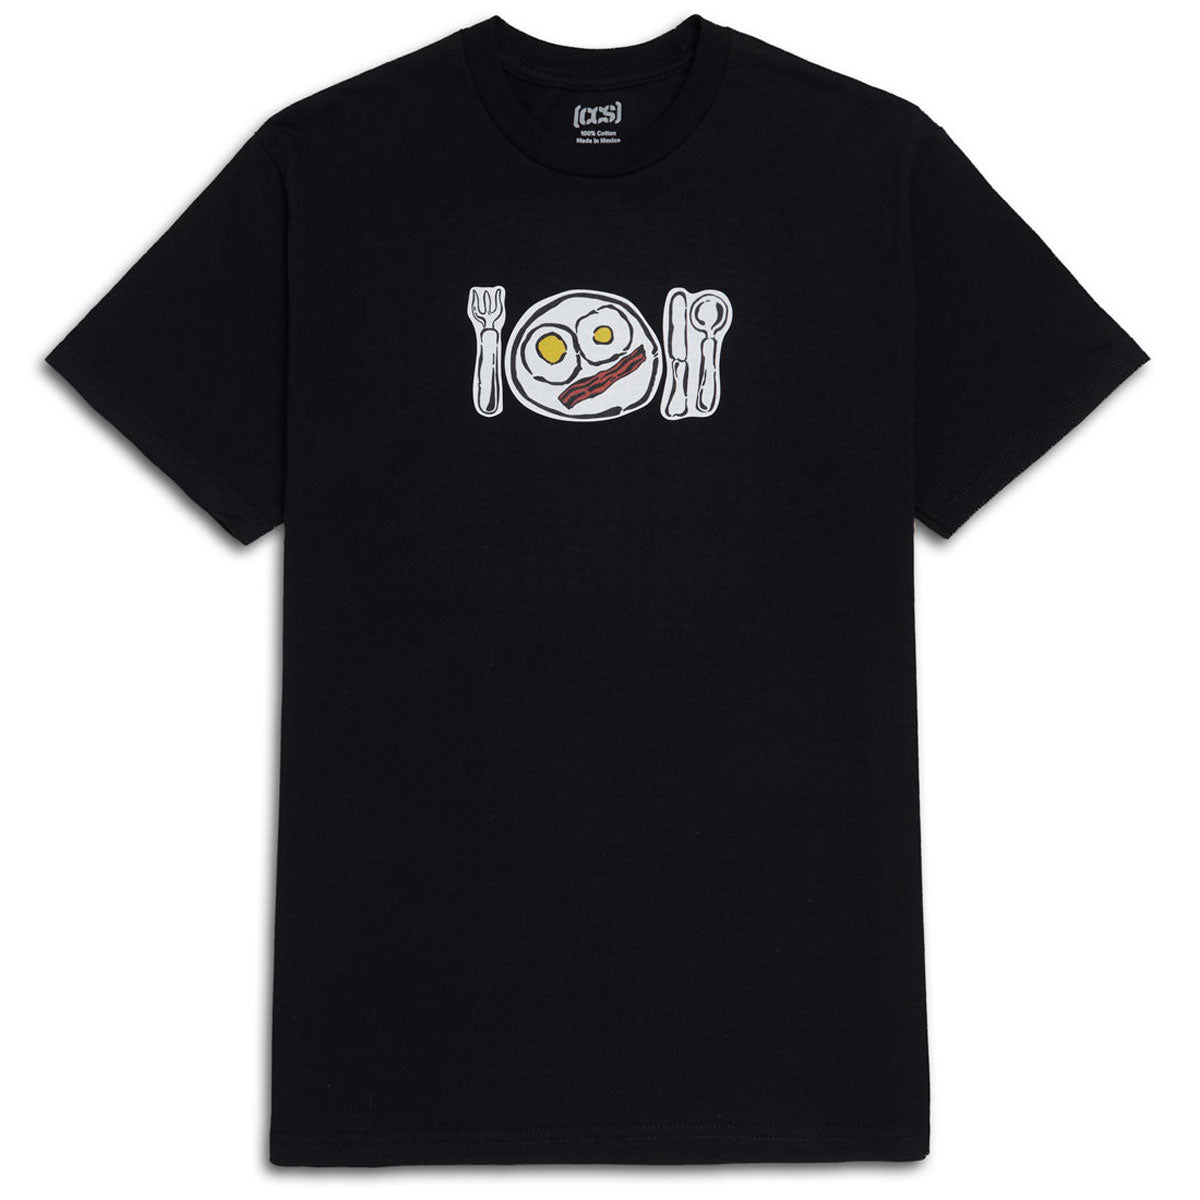 CCS Over Easy T-Shirt - Black - MD image 1